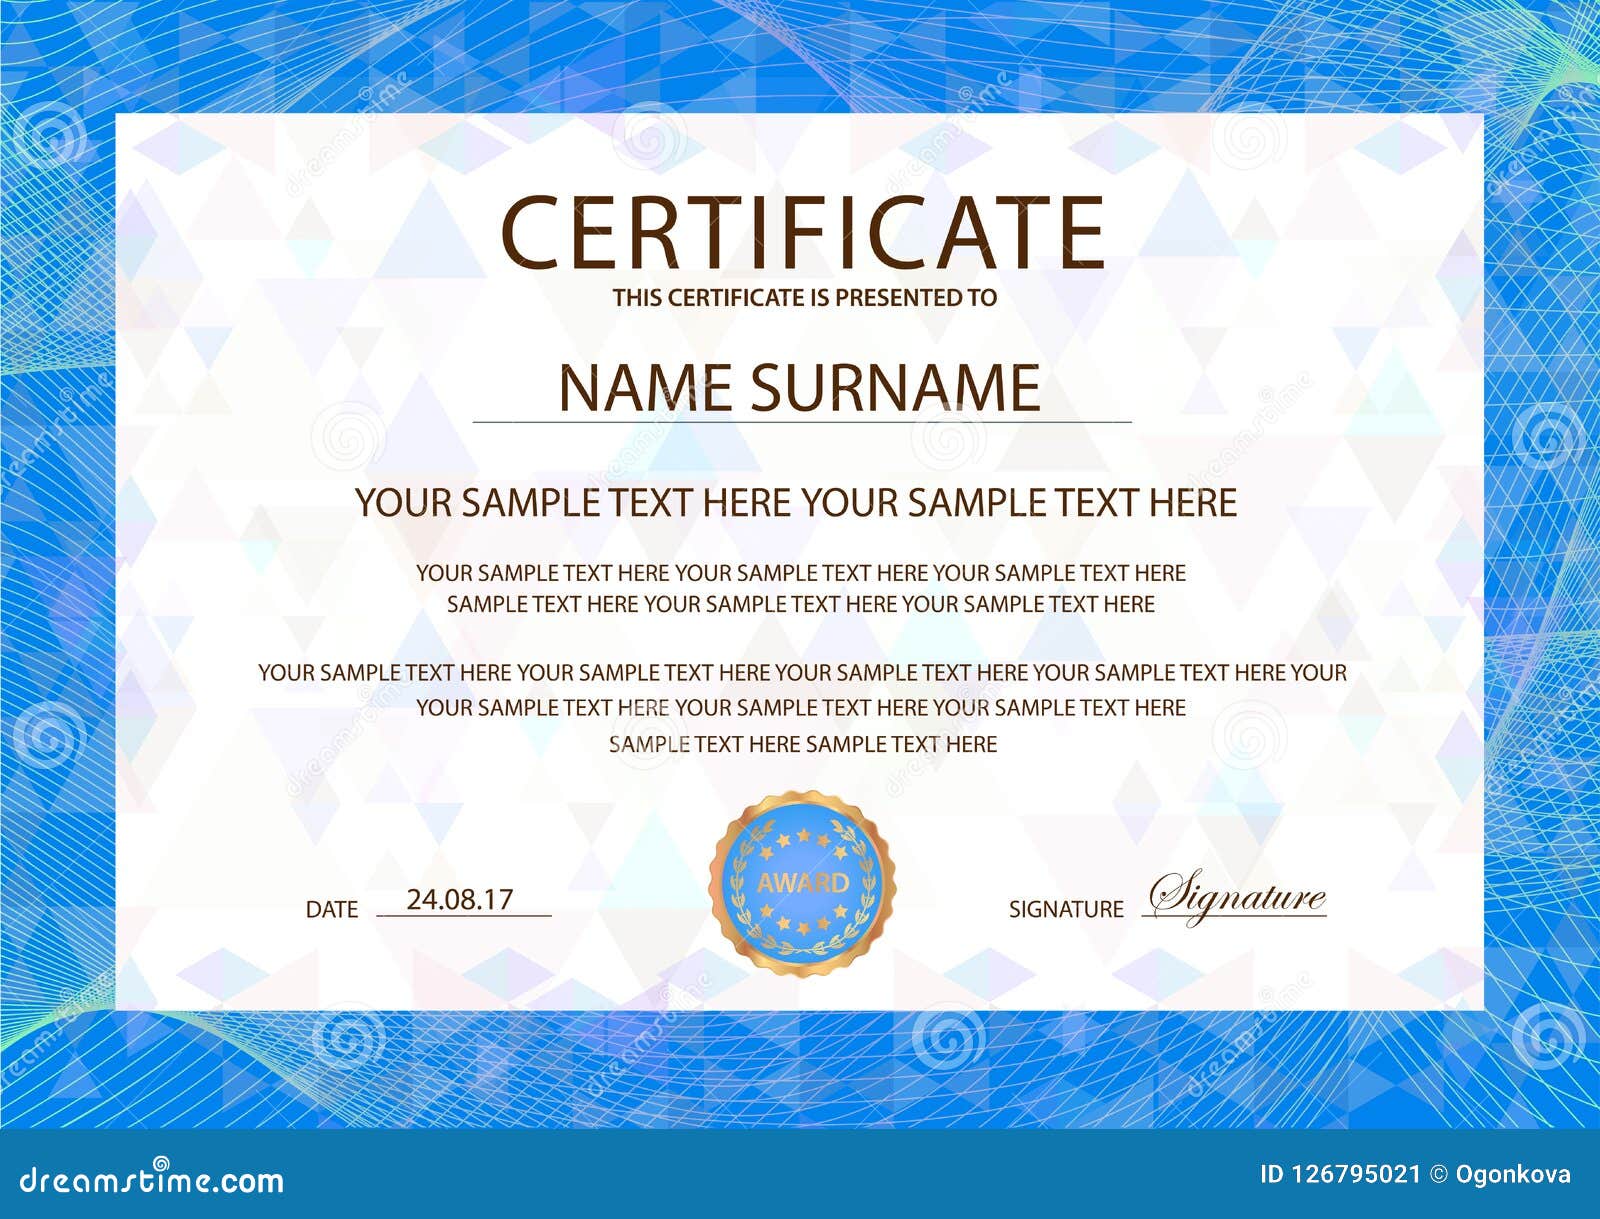 Certificate Vector Template. Formal Secured Blue Border Guilloche Intended For Formal Certificate Of Appreciation Template